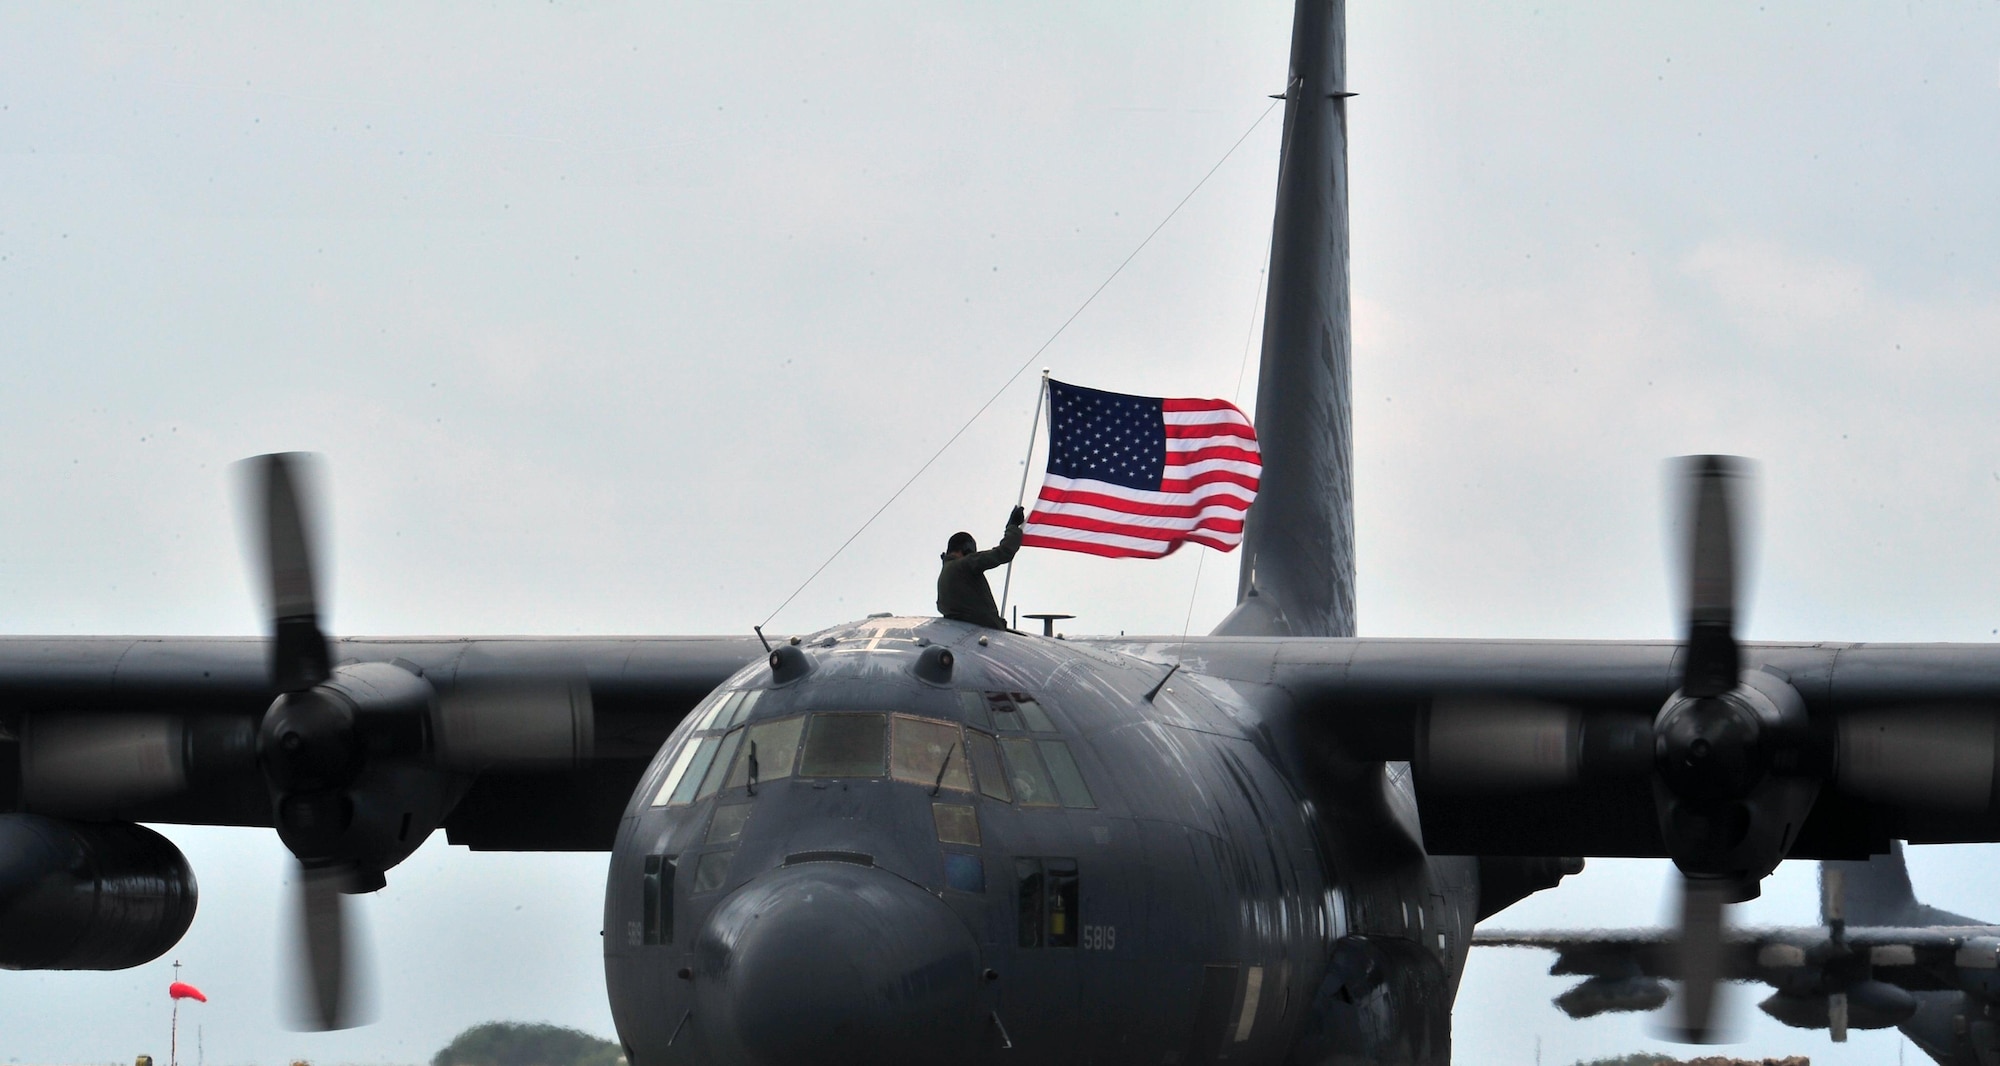 An aircrew member flies an American flag out of the top of an MC-130P Combat Shadow, May 15, 2015, at Hurlburt Field, Fla. Built with 1960s technology, the MC-130P began its special operations career in the mid-1980s and went on to conduct critical air refueling missions in the late 1980s during Operation Just Cause in Panama and the early 1990s during Operation Desert Storm. (U.S. Air Force photo/Airman 1st Class Ryan Conroy) 